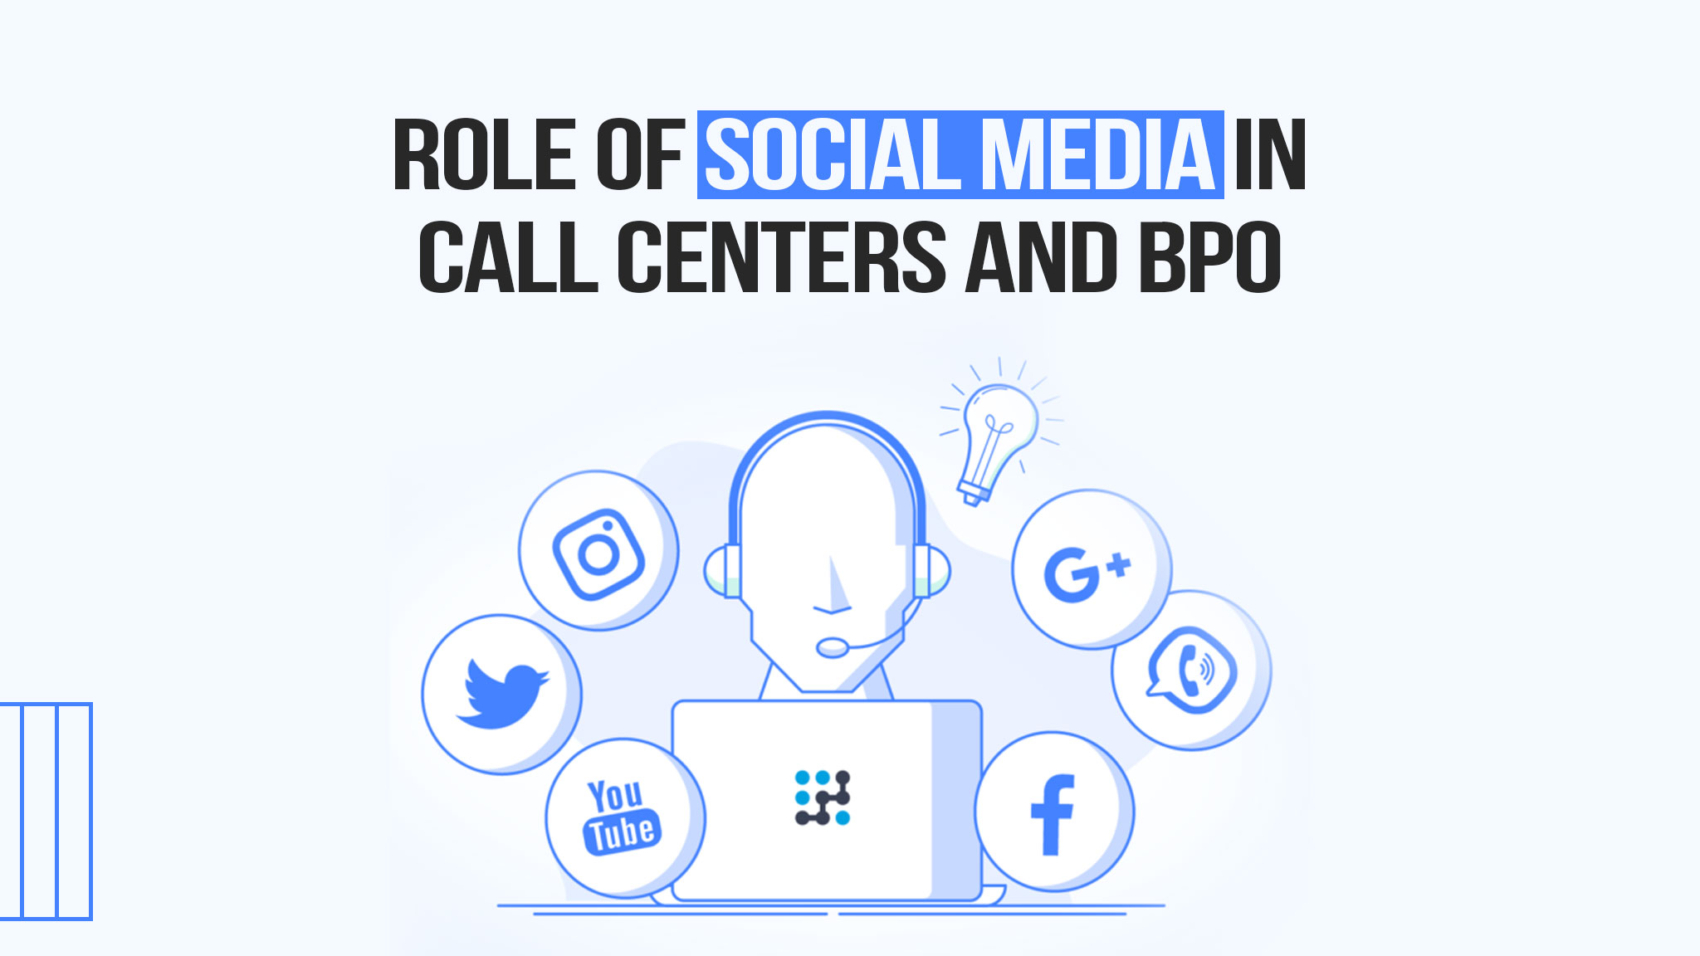 significant advantages of using social media platforms in call centers and BPOs is the ability to provide instant support